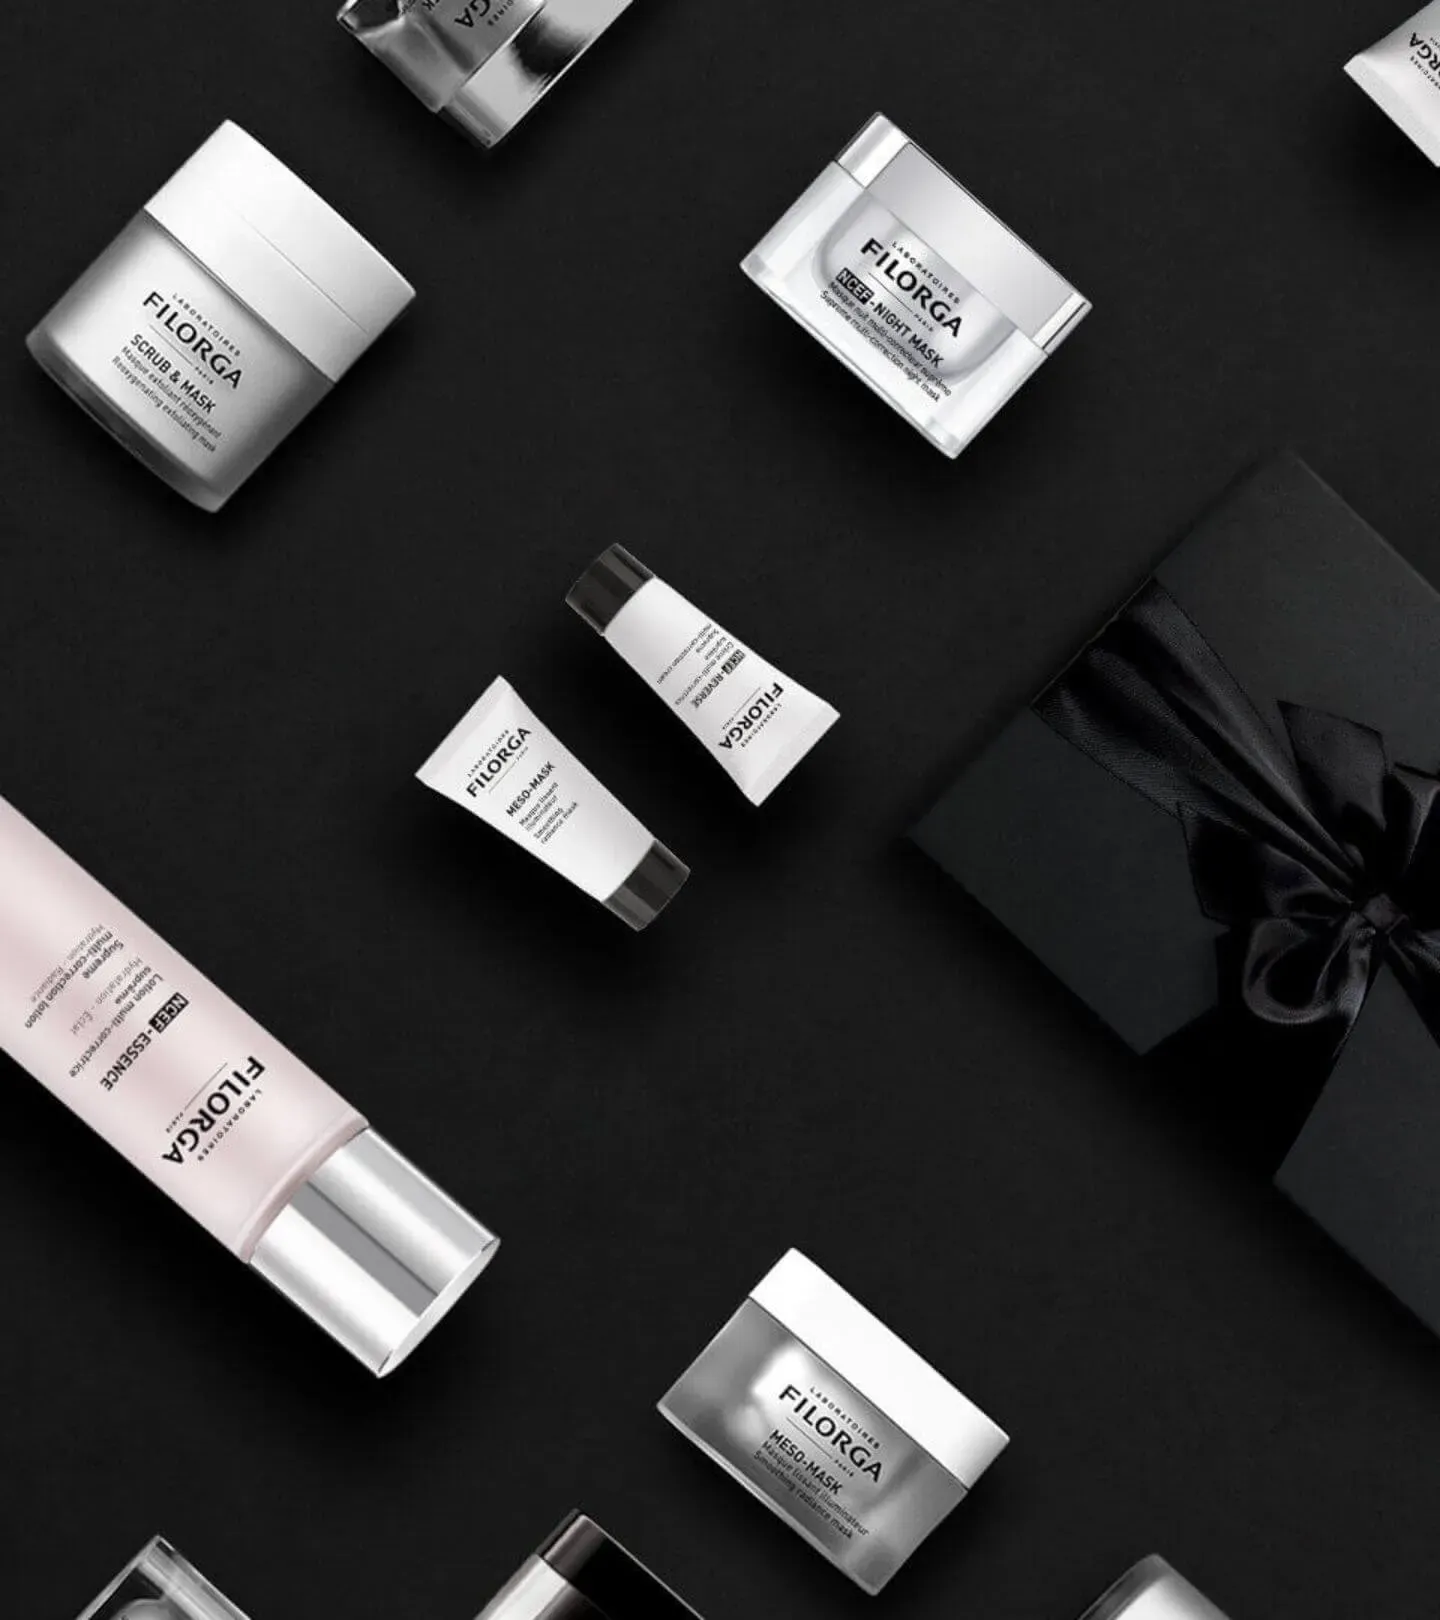 FILORGA anti-aging products lying face up on top of black background